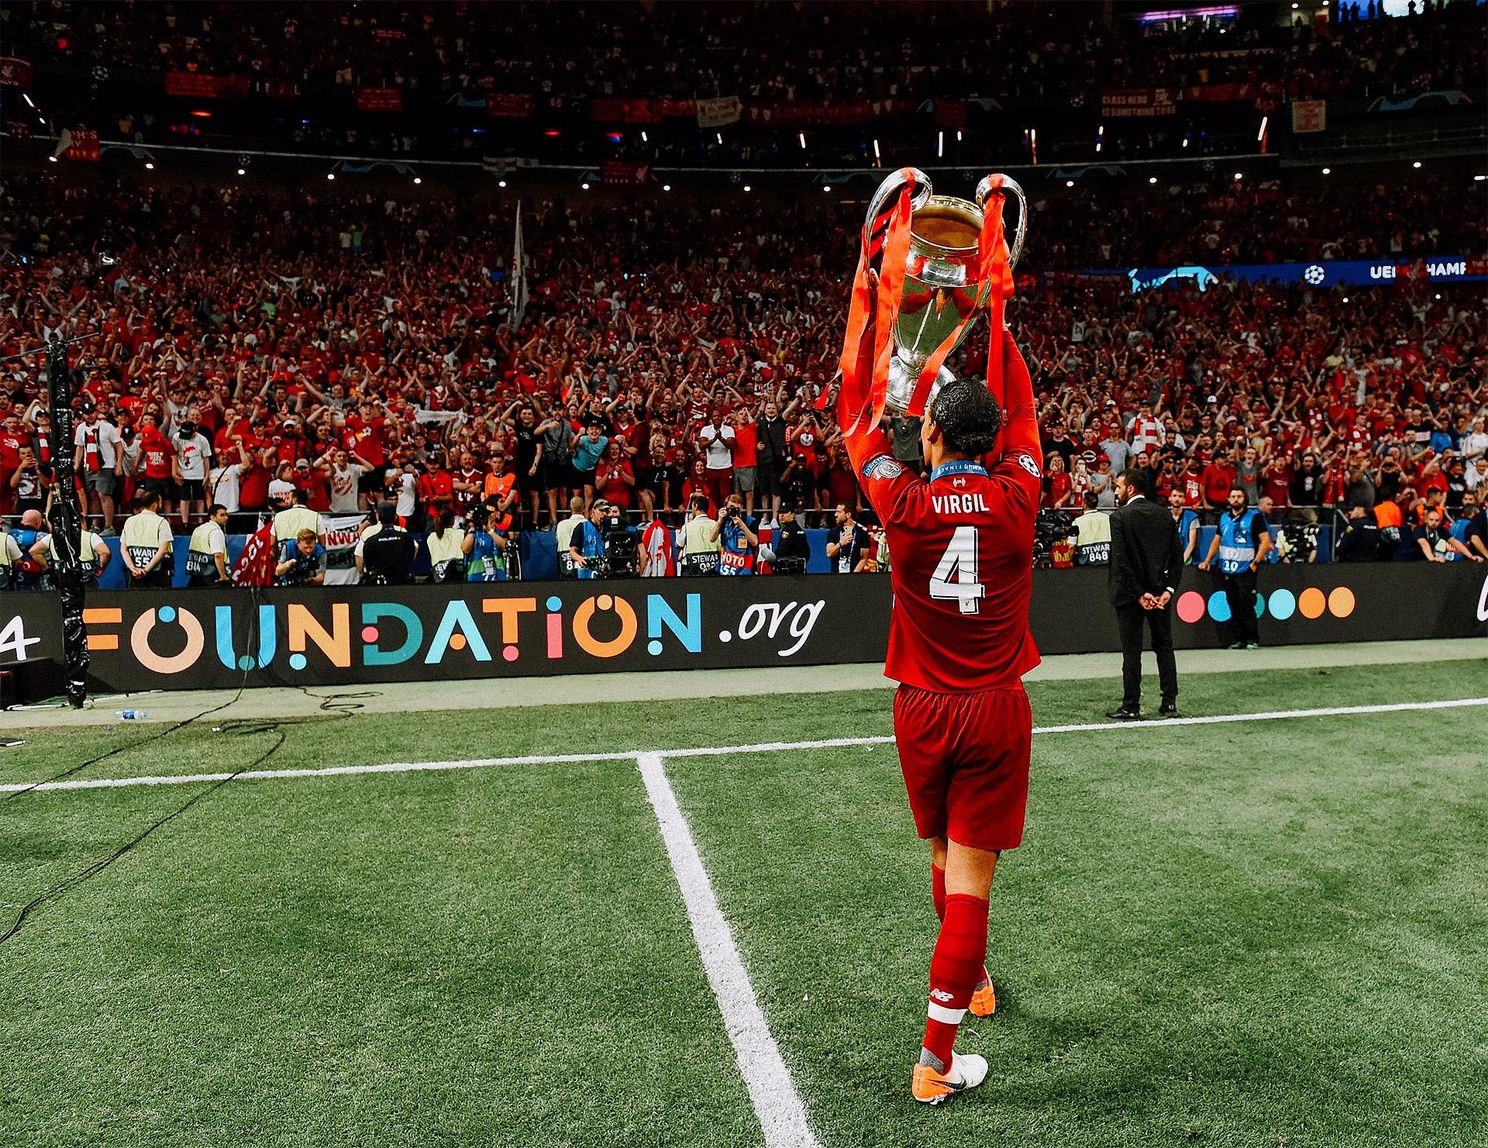 Pictures of every Liverpool player with the 2018/19 Champions League trophy